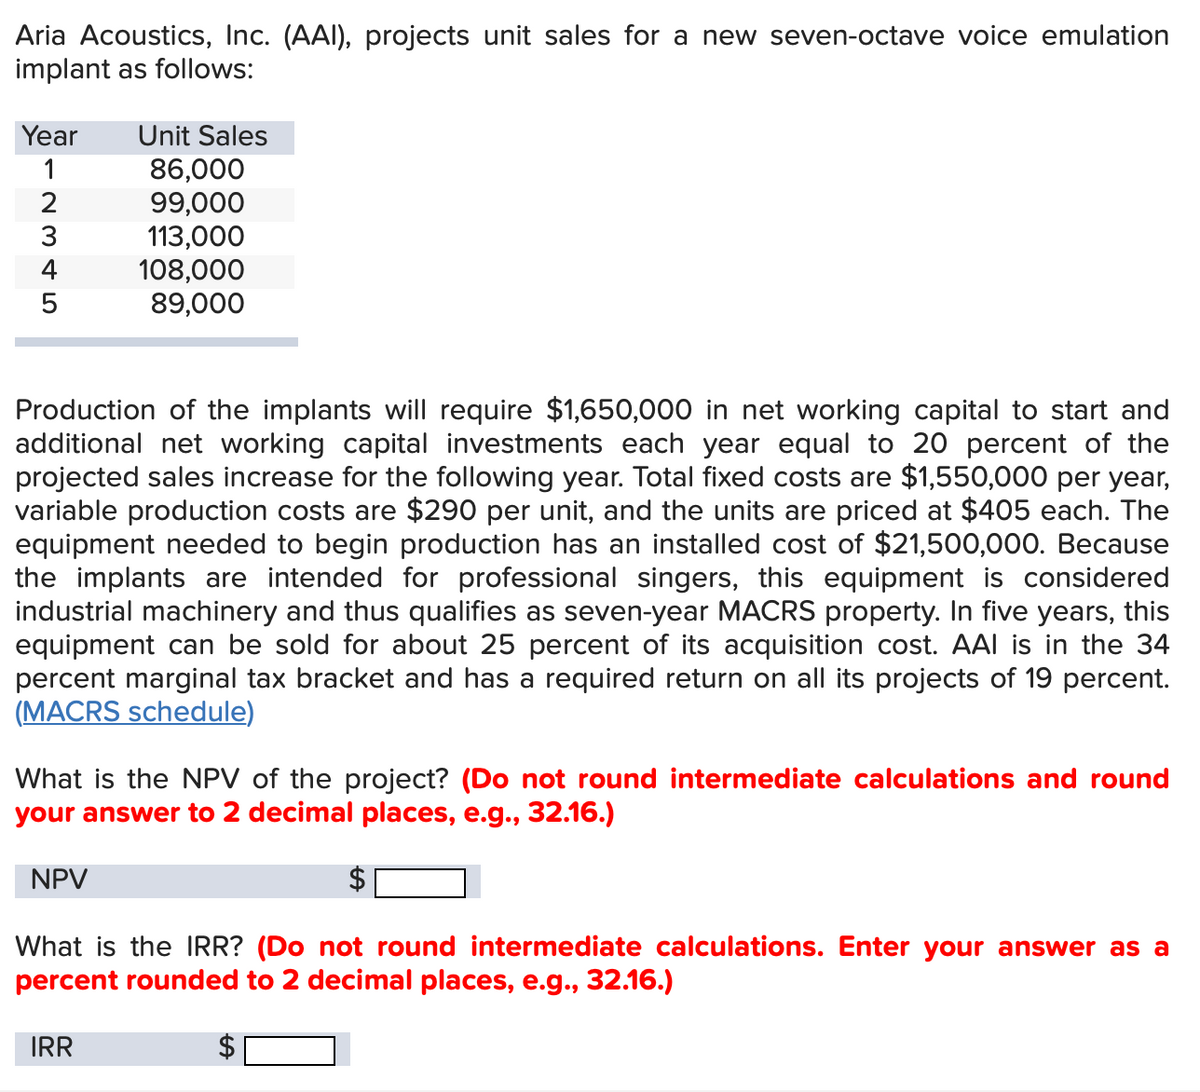 Aria Acoustics, Inc. (AAI), projects unit sales for a new seven-octave voice emulation
implant as follows:
Year
Unit Sales
1
86,000
2345
99,000
113,000
108,000
89,000
Production of the implants will require $1,650,000 in net working capital to start and
additional net working capital investments each year equal to 20 percent of the
projected sales increase for the following year. Total fixed costs are $1,550,000 per year,
variable production costs are $290 per unit, and the units are priced at $405 each. The
equipment needed to begin production has an installed cost of $21,500,000. Because
the implants are intended for professional singers, this equipment is considered
industrial machinery and thus qualifies as seven-year MACRS property. In five years, this
equipment can be sold for about 25 percent of its acquisition cost. AAI is in the 34
percent marginal tax bracket and has a required return on all its projects of 19 percent.
(MACRS schedule)
What is the NPV of the project? (Do not round intermediate calculations and round
your answer to 2 decimal places, e.g., 32.16.)
NPV
What is the IRR? (Do not round intermediate calculations. Enter your answer as a
percent rounded to 2 decimal places, e.g., 32.16.)
IRR